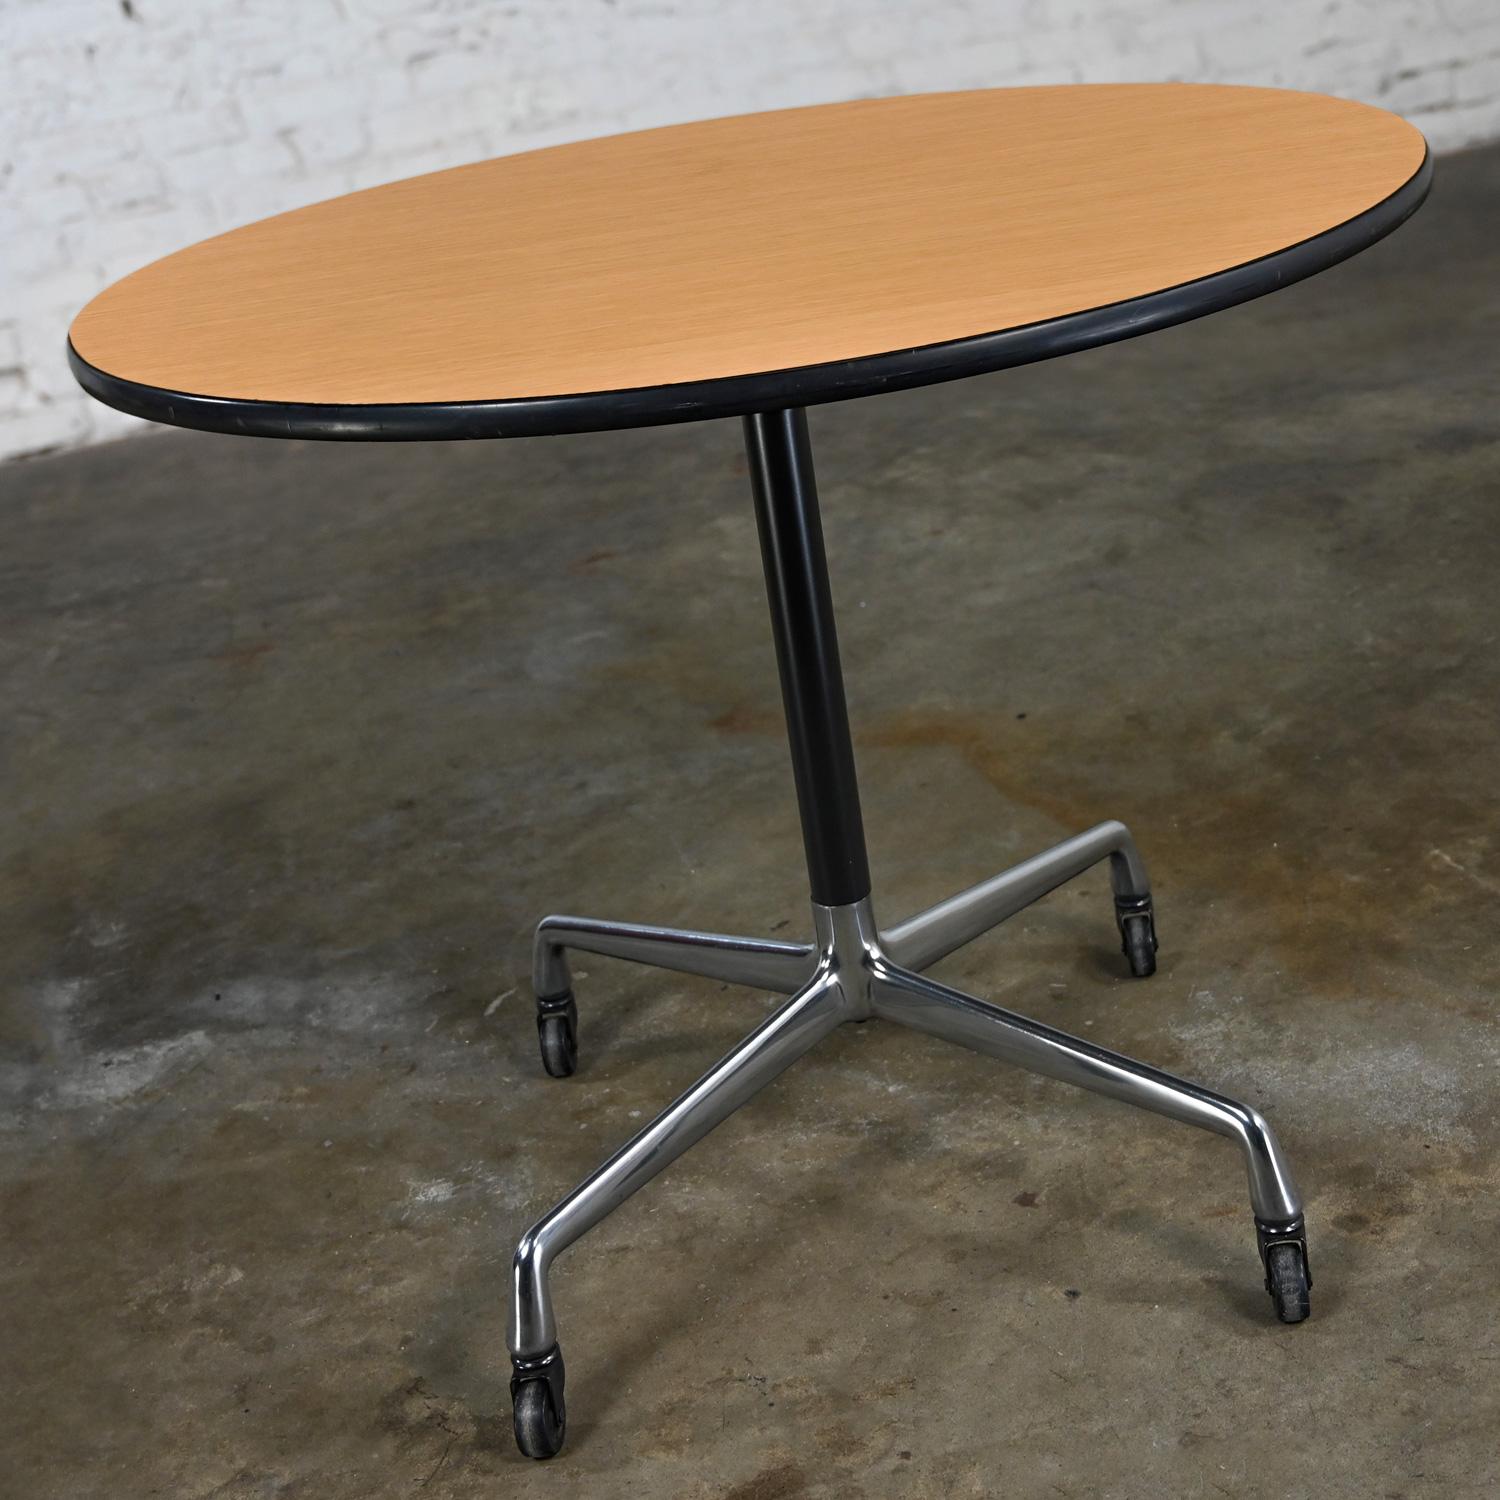 Eames Herman Miller Round Table Universal Base Casters & 36” Blonde Laminate Top For Sale 13